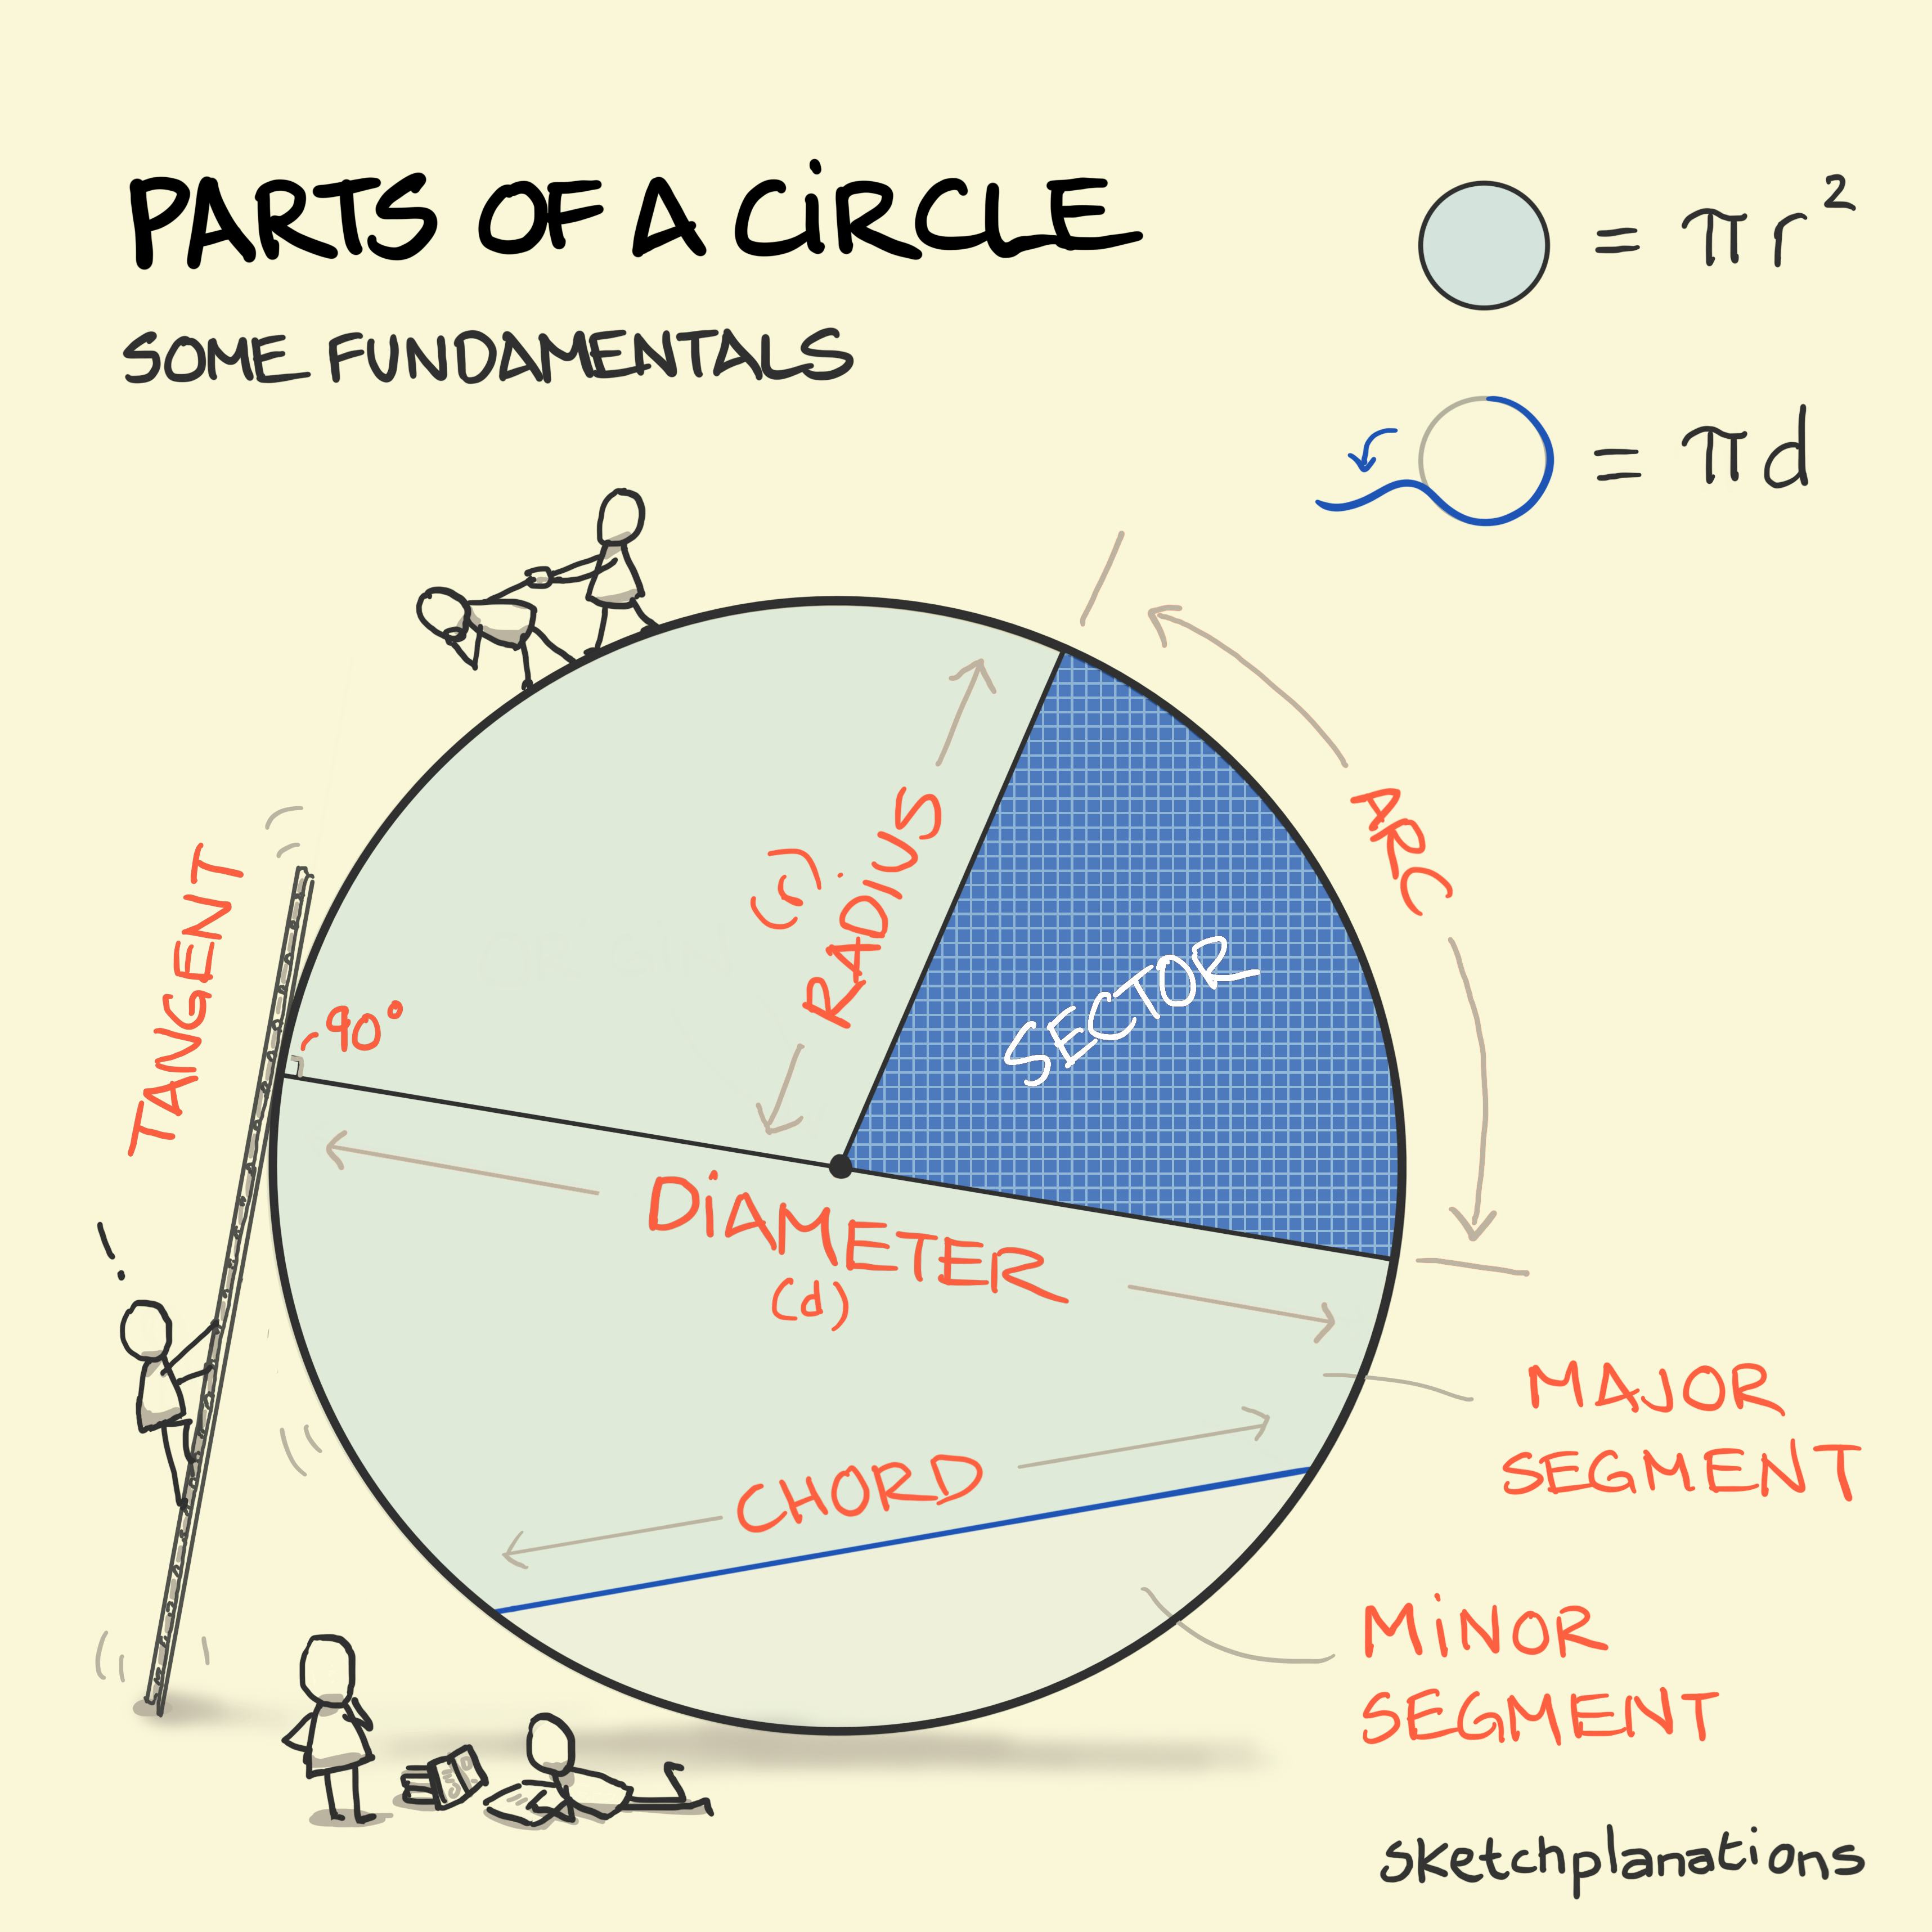 A circle with a number of its mathematical parts labelled. And someone trying to climb up the tangent.